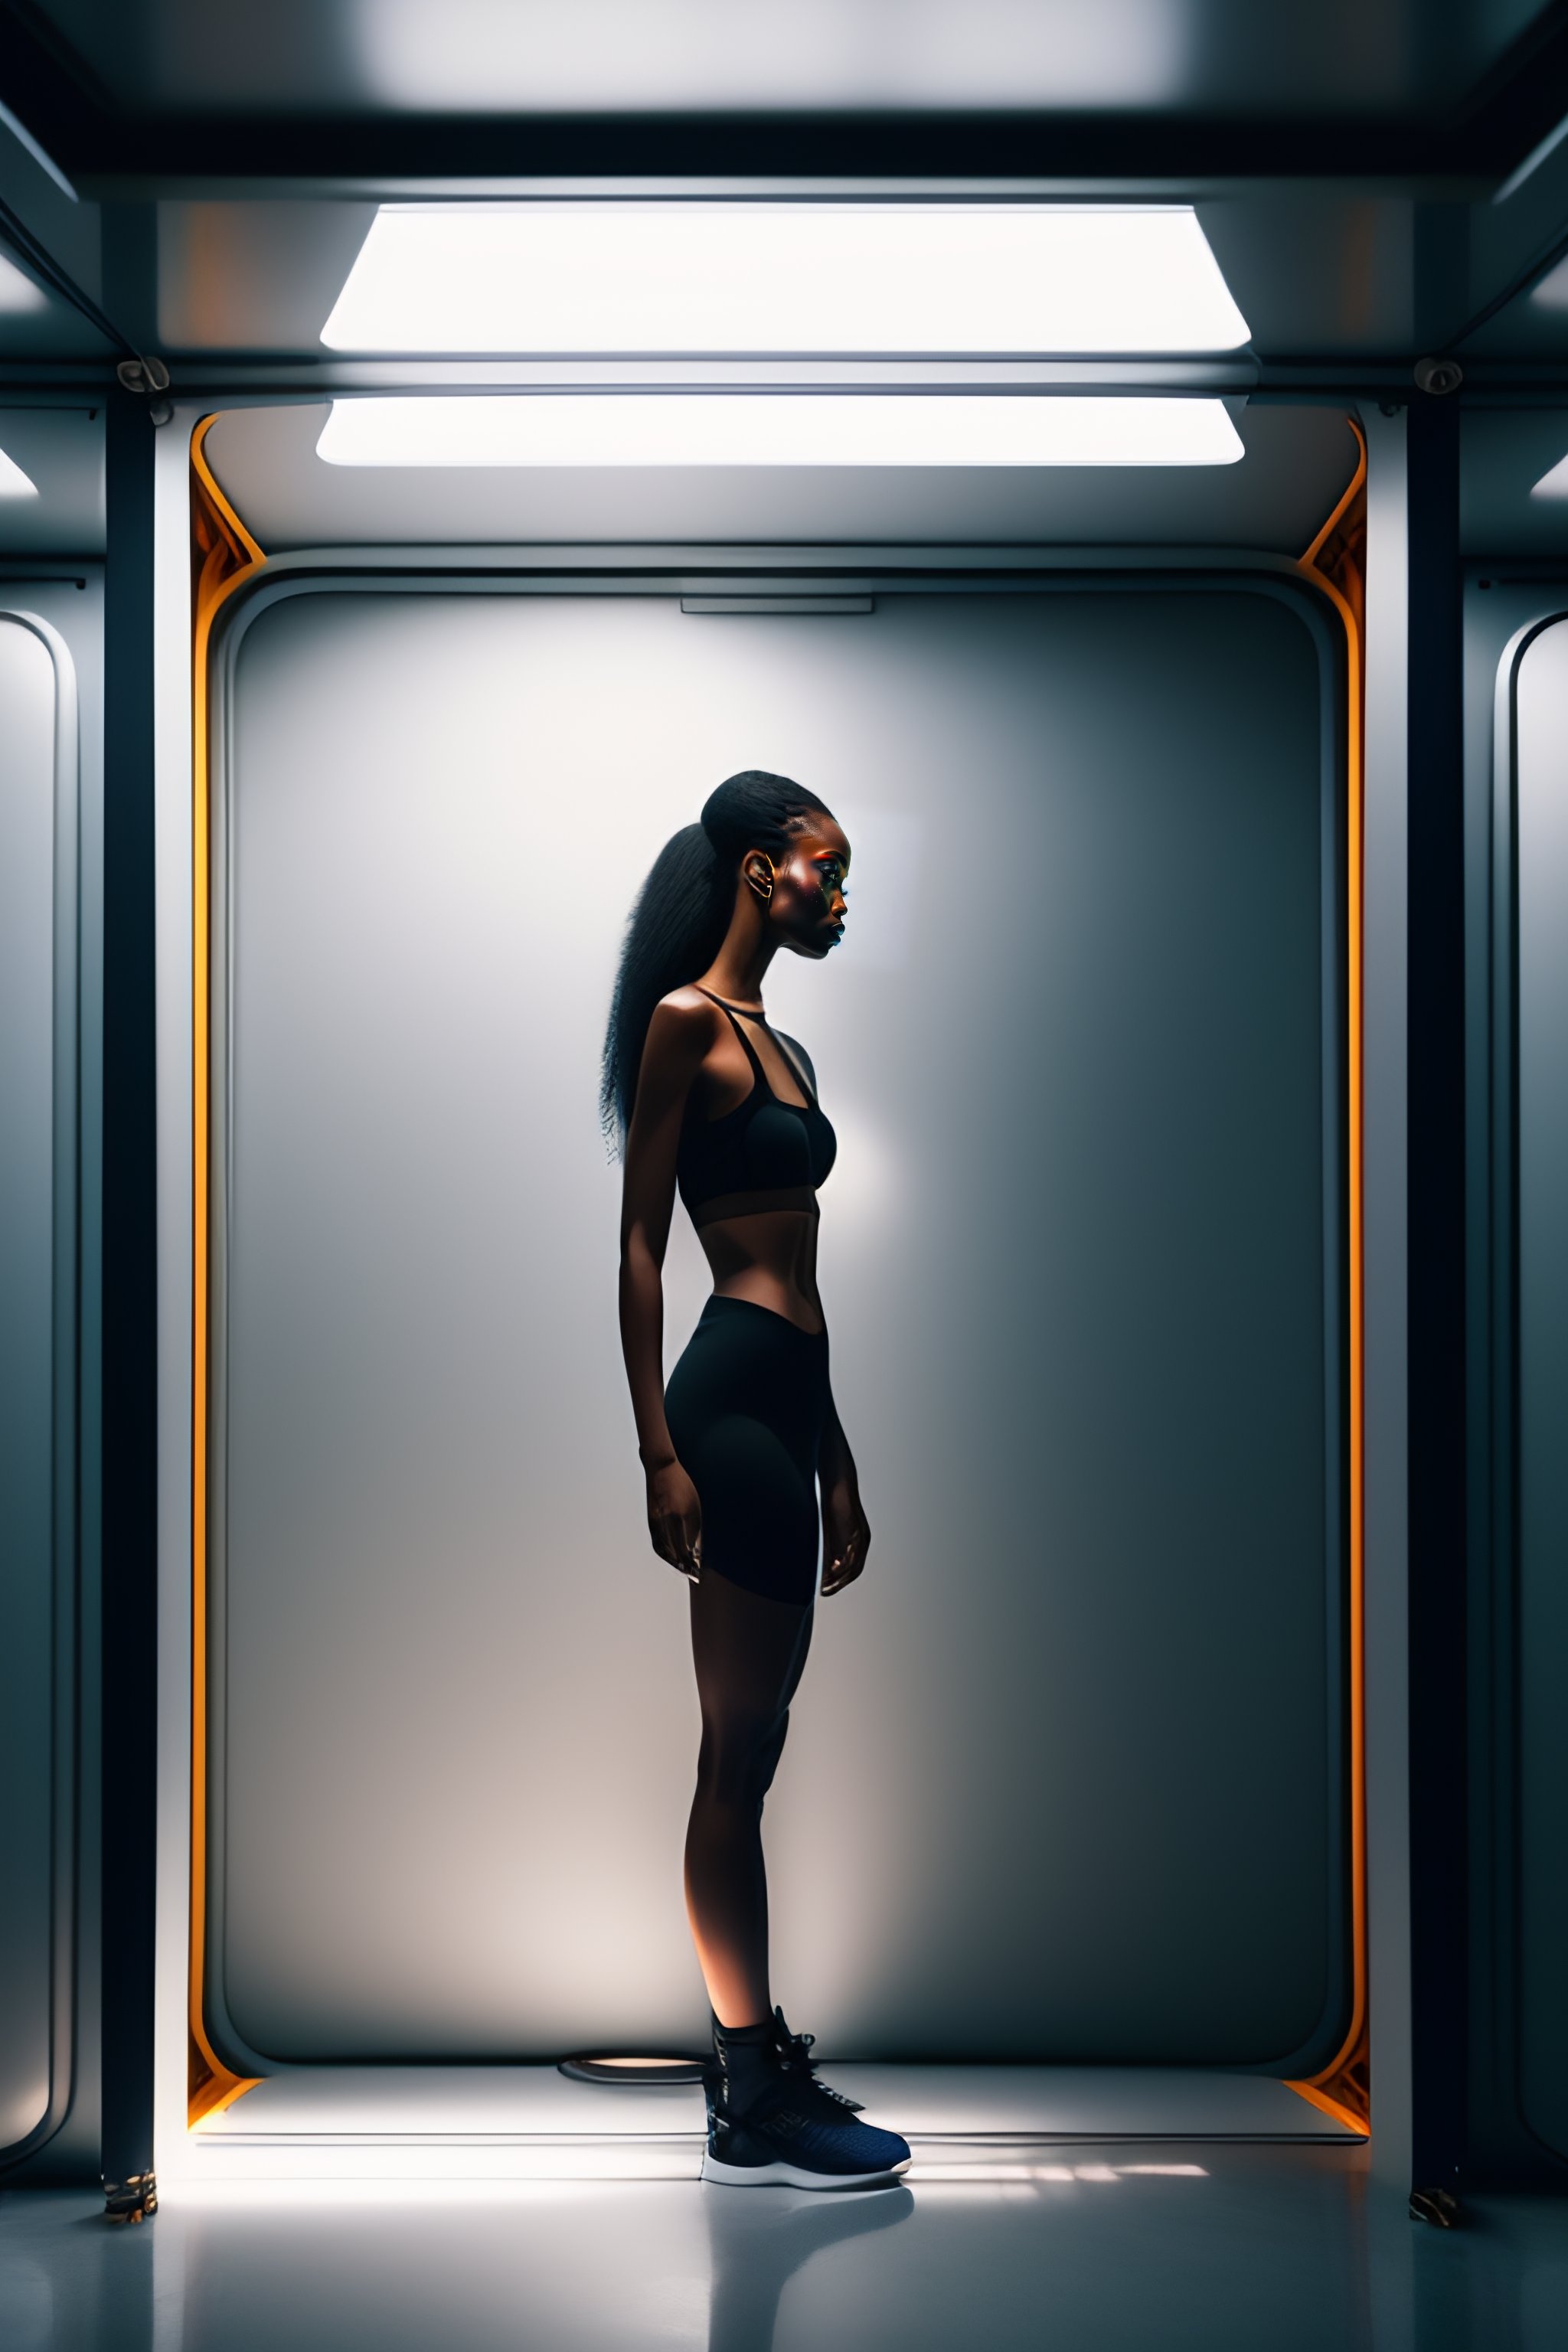 Lexica - Female standing pose trapped in a small space station